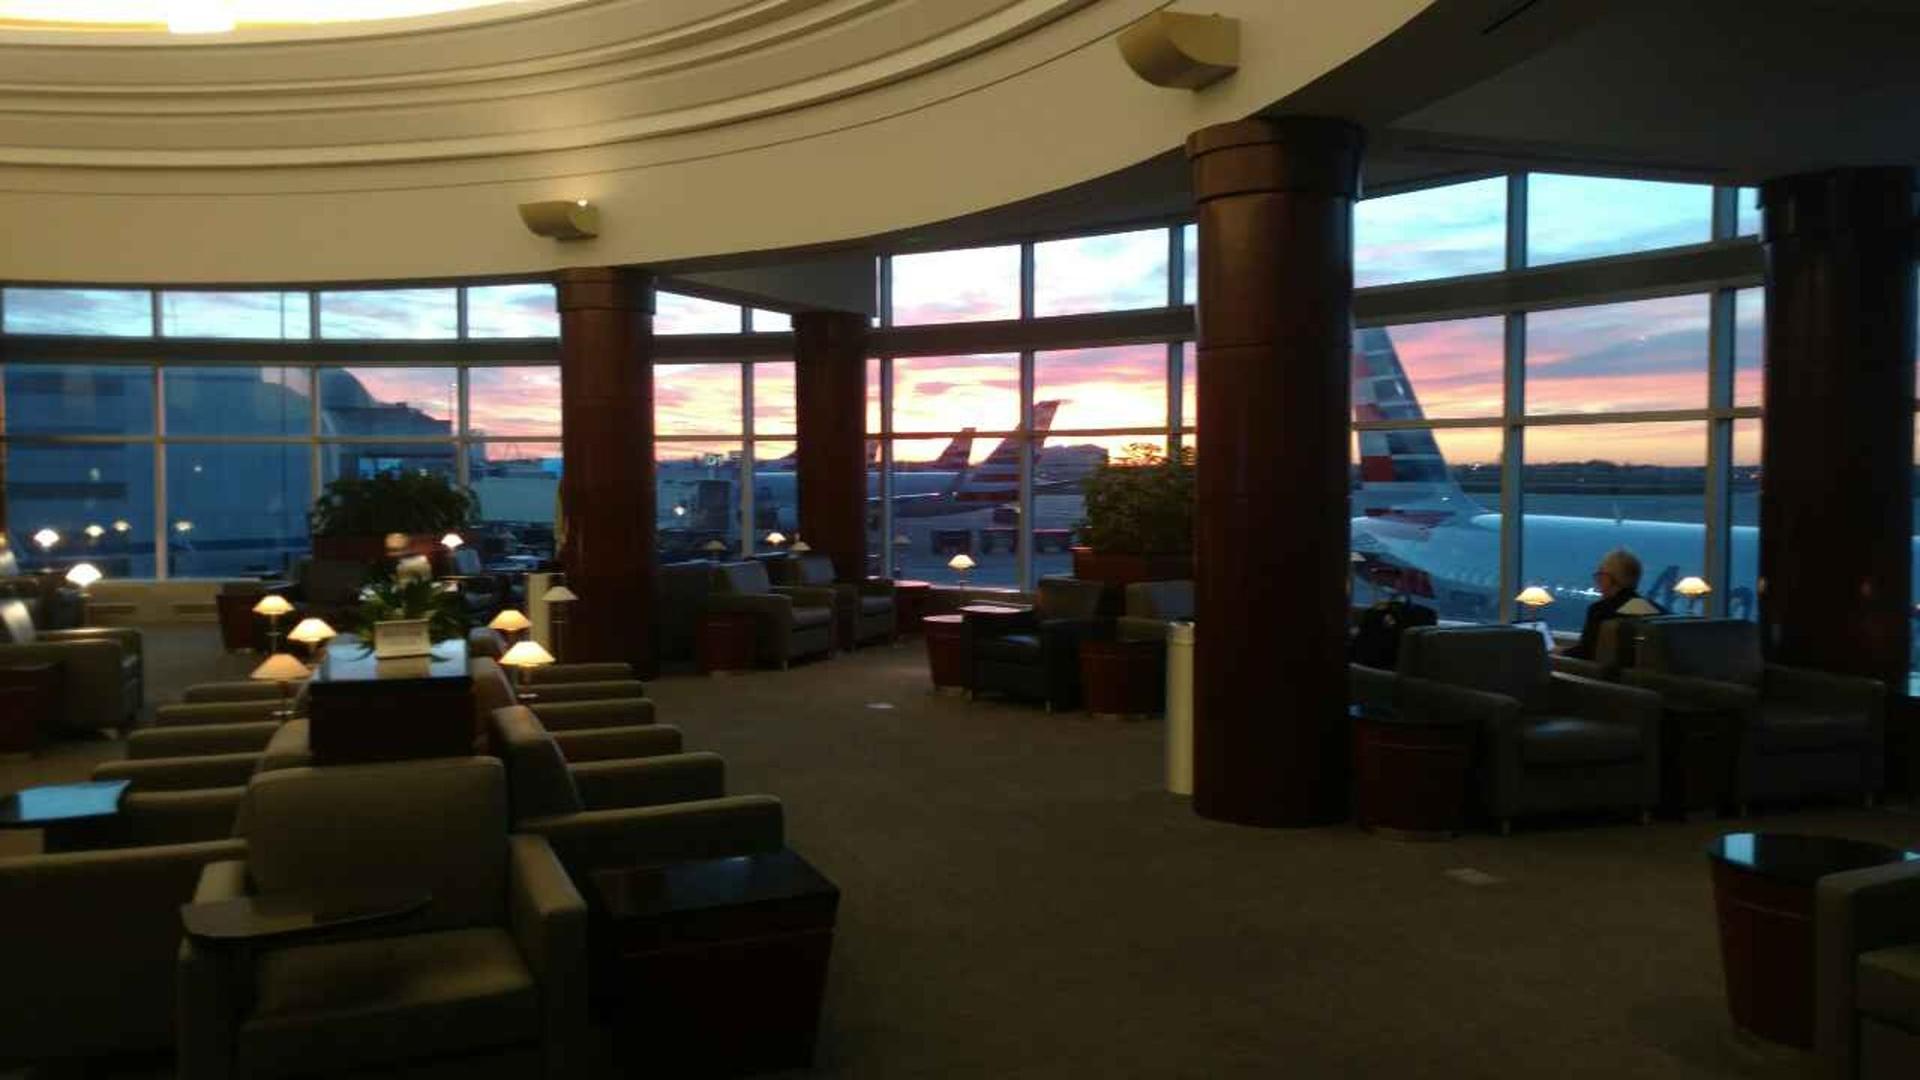 American Airlines Admirals Club image 26 of 37